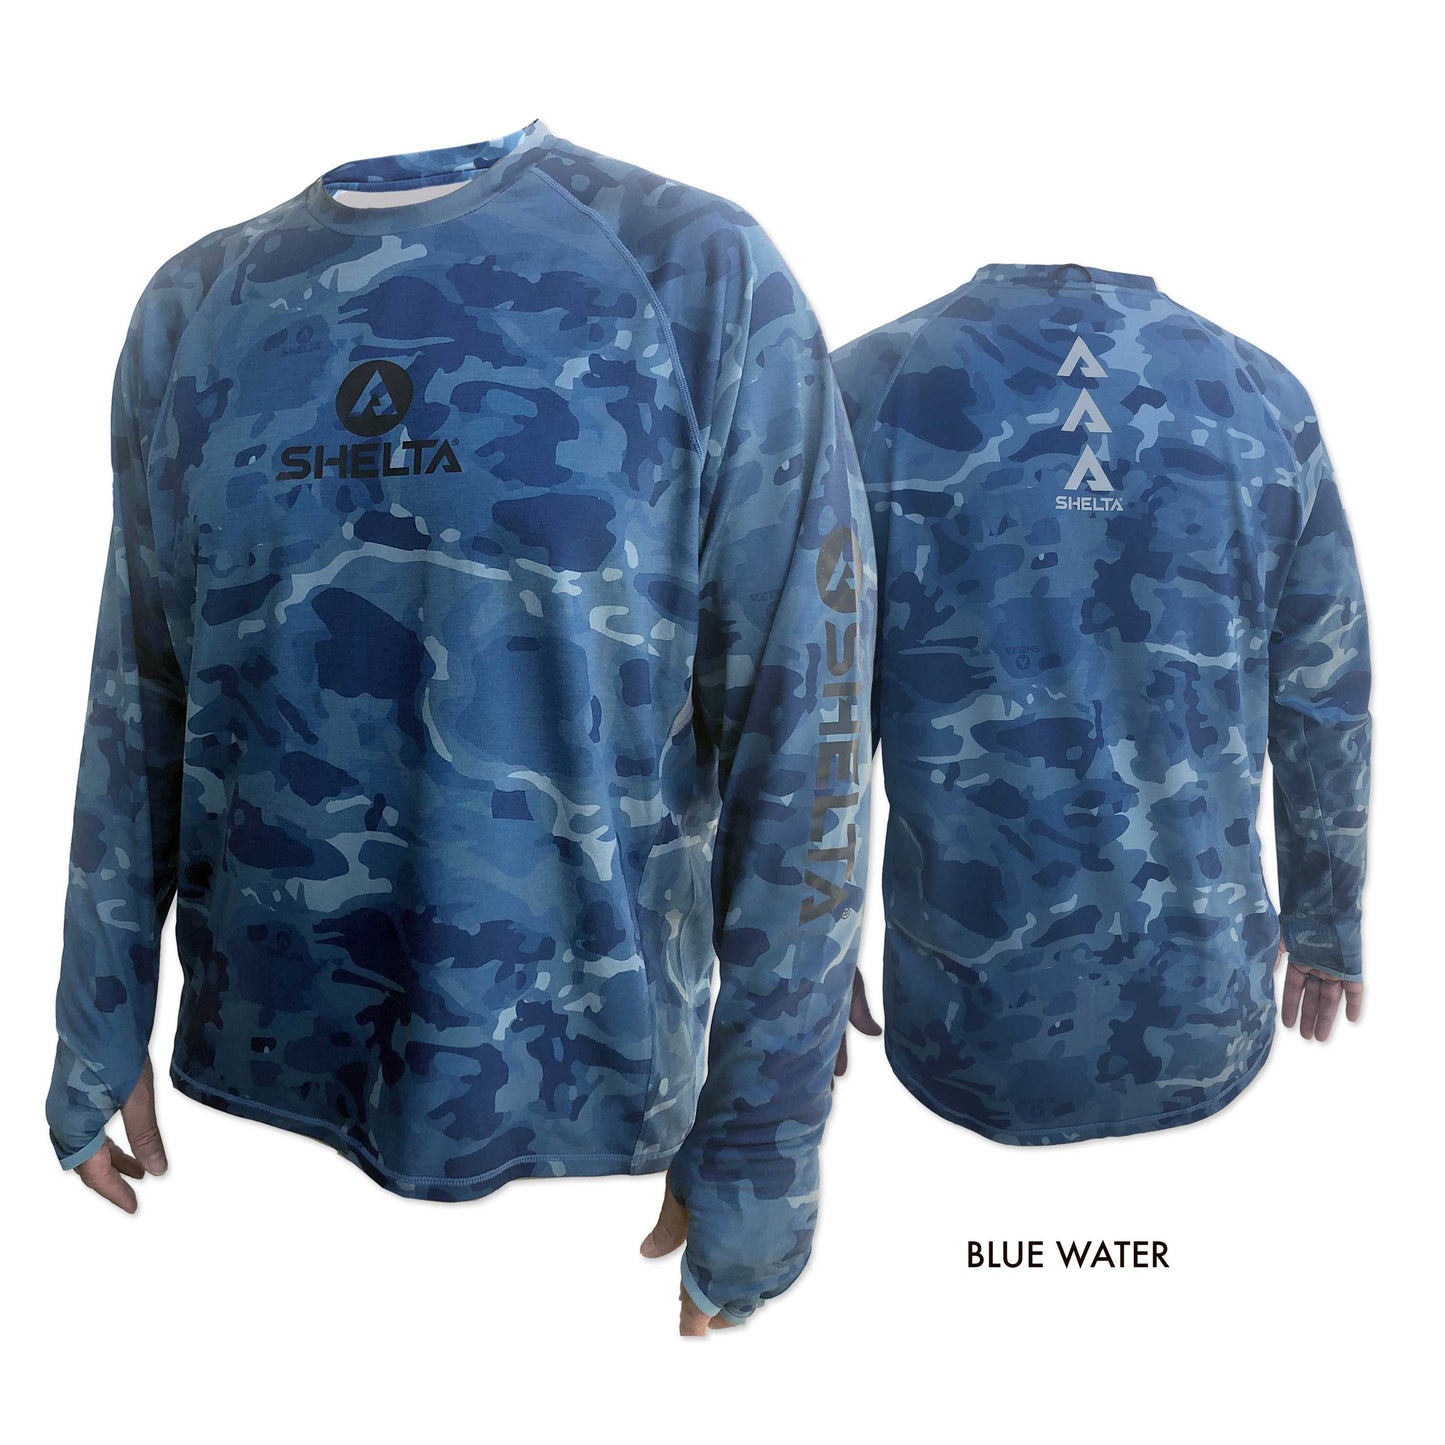 The Aquaterra Crew neck  in Blue Water is engineered & built with sun protection, function, and durability in mind.  Truly amphibious these technical tops work as well in the water as on land.  Offering features consistent with Shelta core values and innovation goals.   UPF 50+ UV protection, the highest rating given.  Blocks 98% of UVA/UVB radiation.